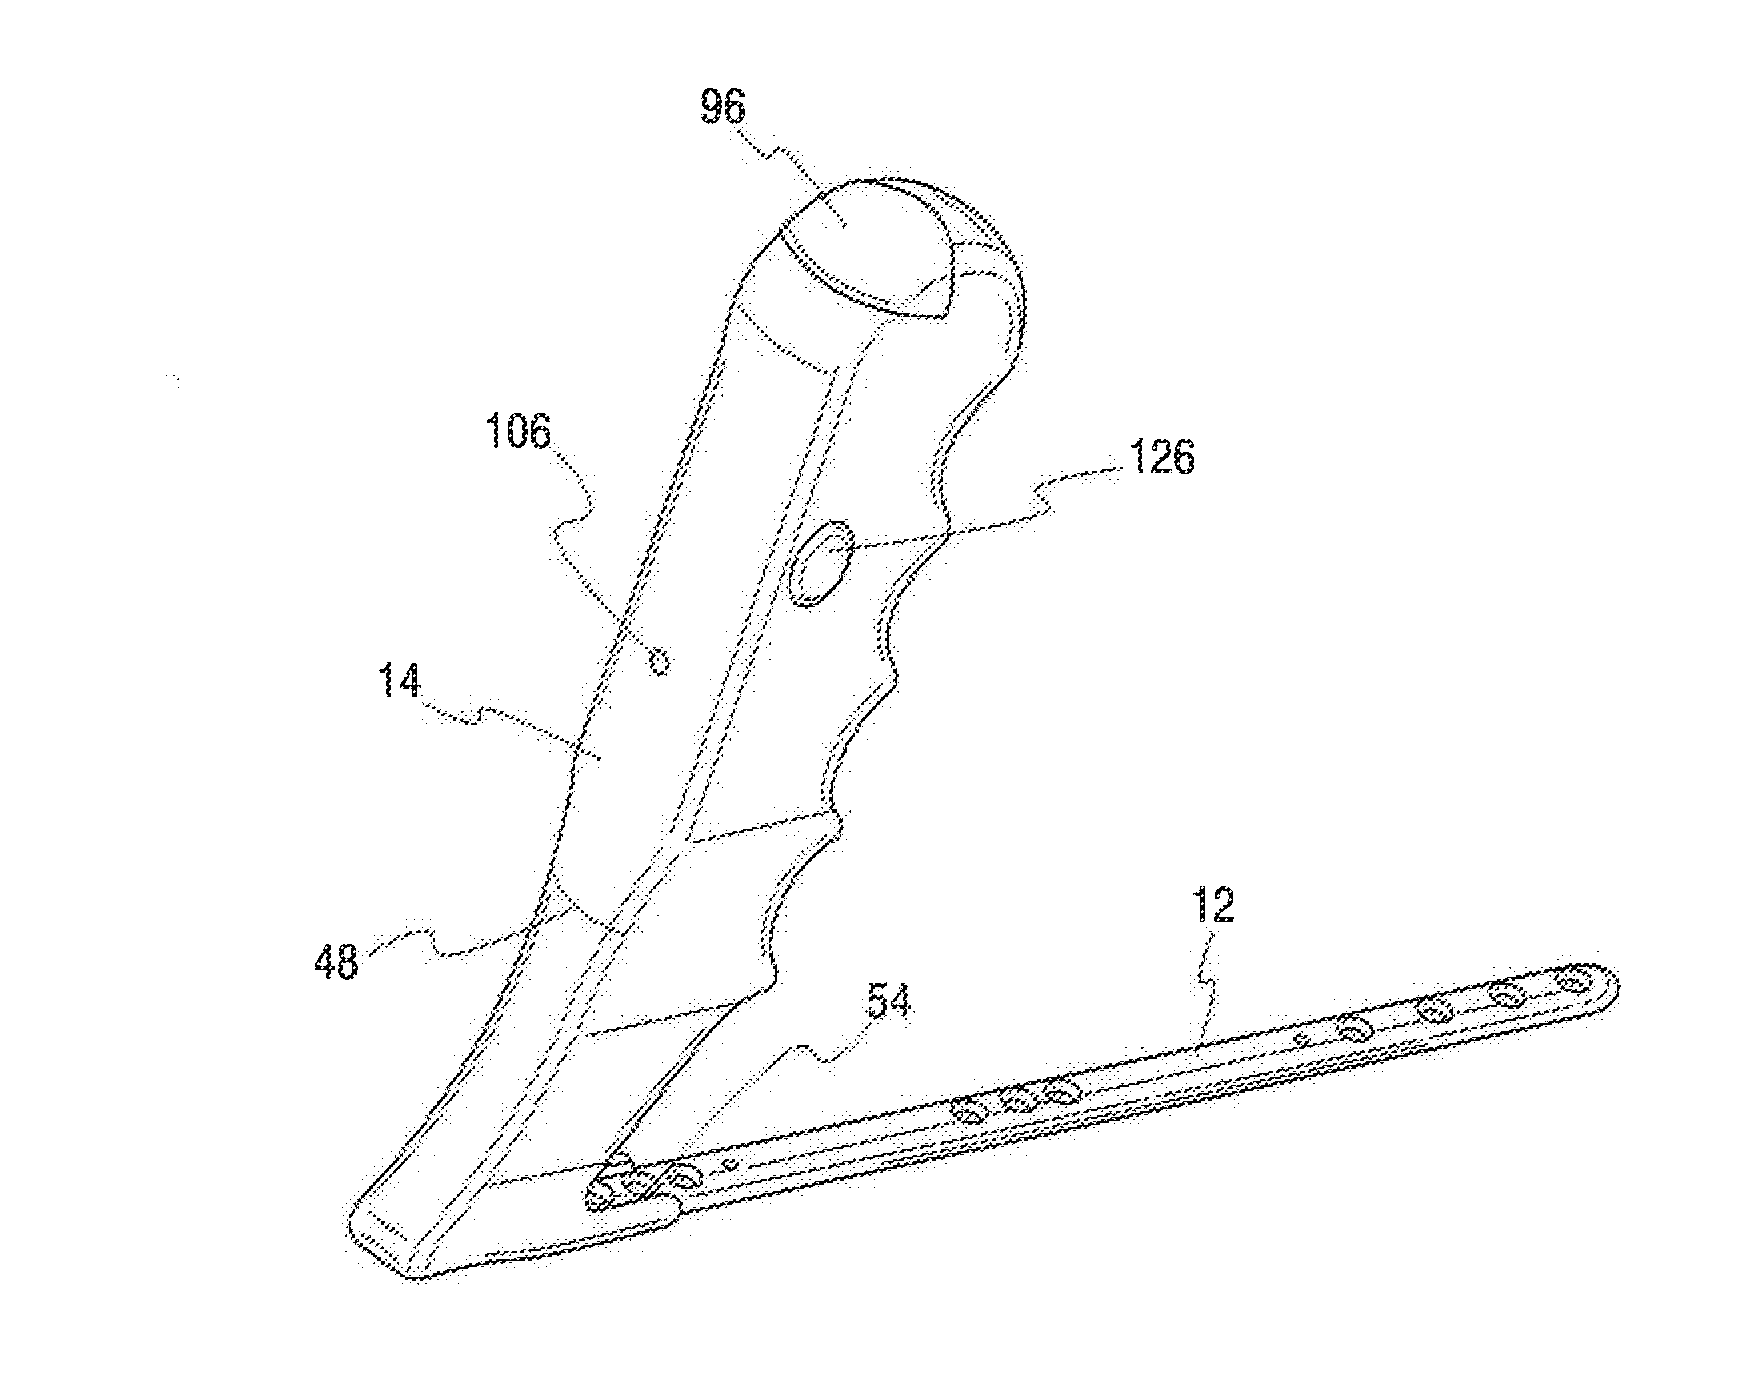 Method of securing a plate to a bone at a fracture site utilizing a detachable inserter